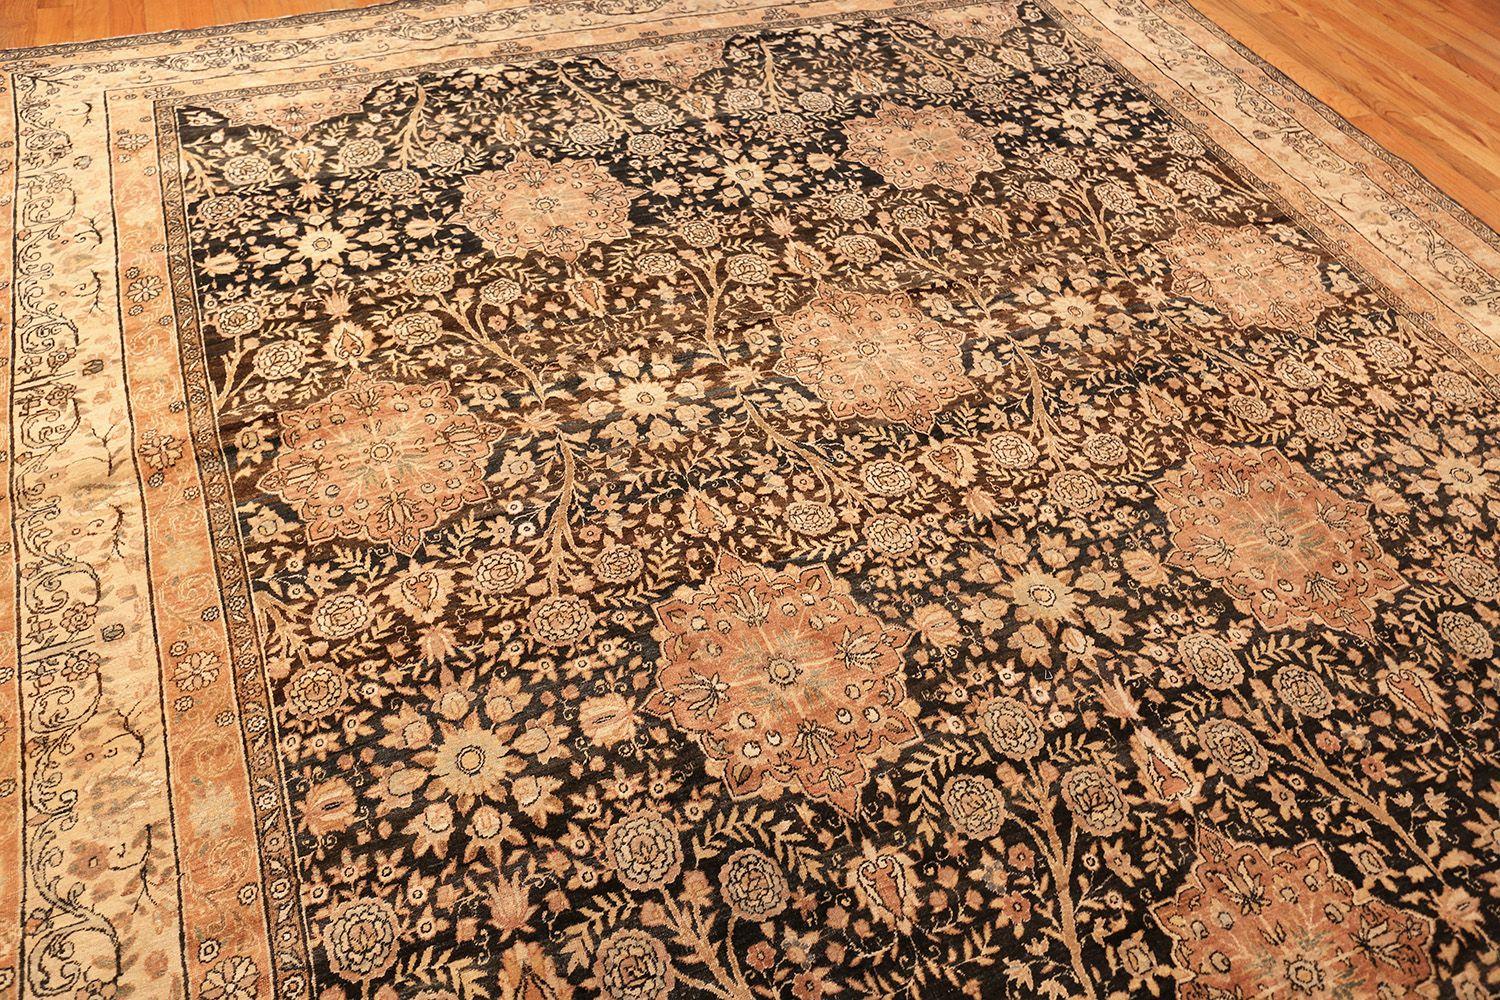 Beautiful Charcoal Colored Background Floral Antique Persian Kerman Rug, Country of Origin / Rug Type: Persian Rugs, Circa Date: 1900. Size: 9 ft 9 in x 14 ft 6 in (2.97 m x 4.42 m)

A pattern of sunset-hued stars surrounded by white roses on a